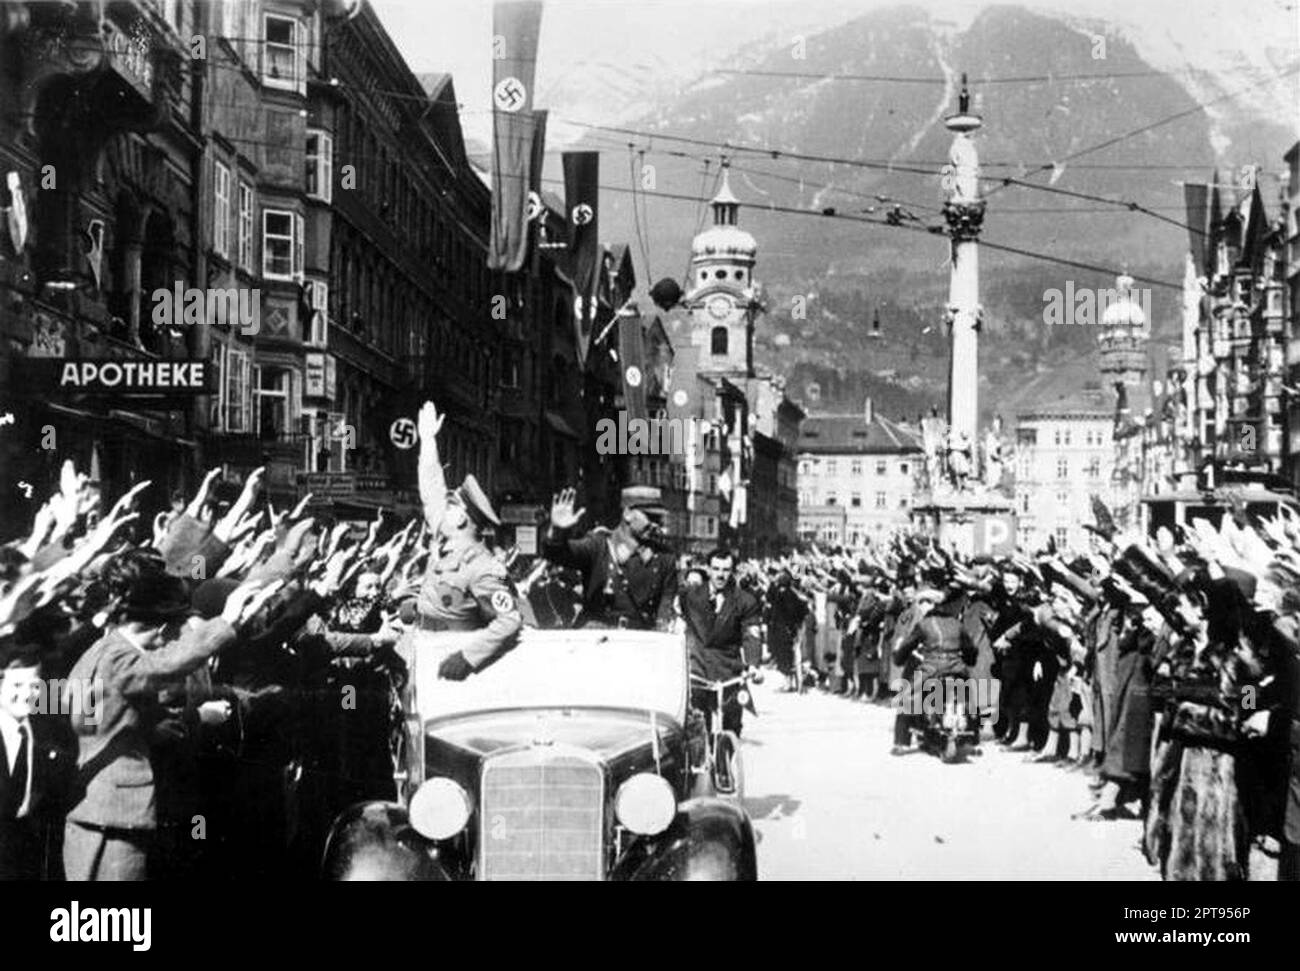 Jubilant crowds cheering the Hitler's motorcade entering the centre of Innsbruck after the annexation of Austria and its incorporation into the Greman Reich. Stock Photo